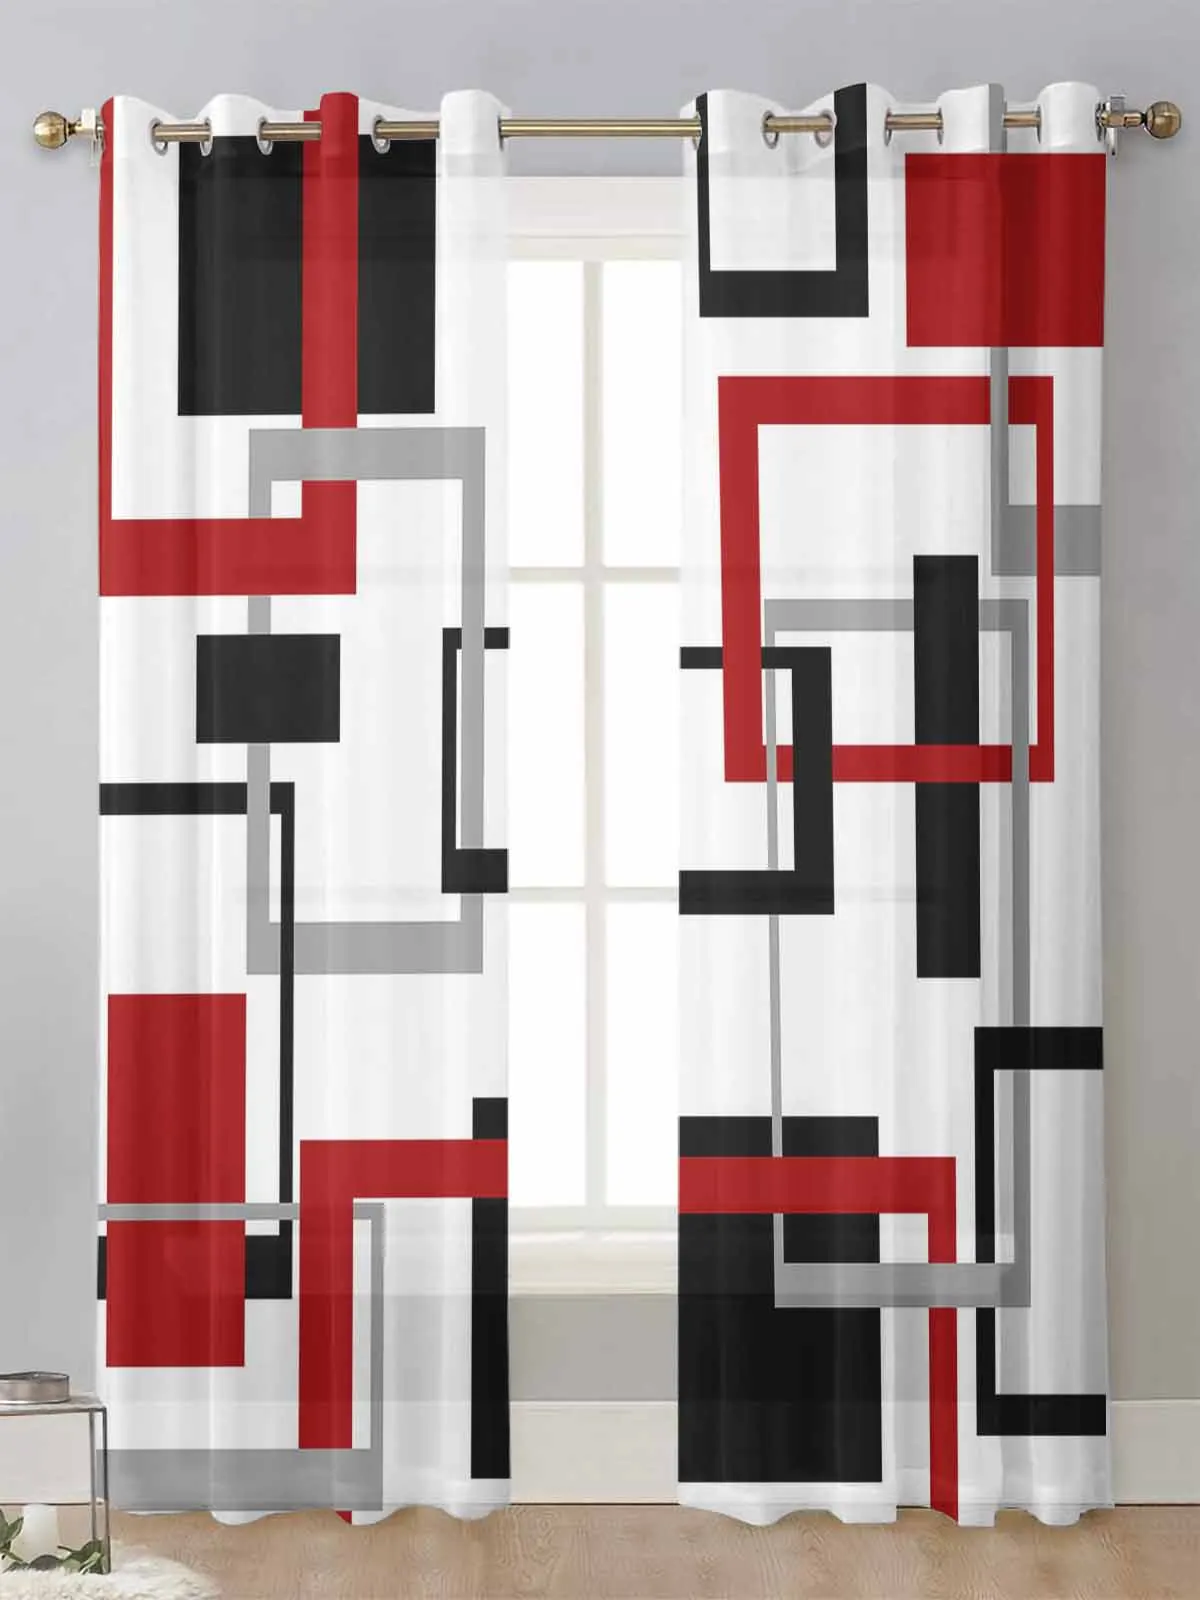 

Abstract Geometry Squares Modern Art Black Red Sheer Curtains Living Room Window Voile Tulle Curtain Cortinas Drapes Home Decor